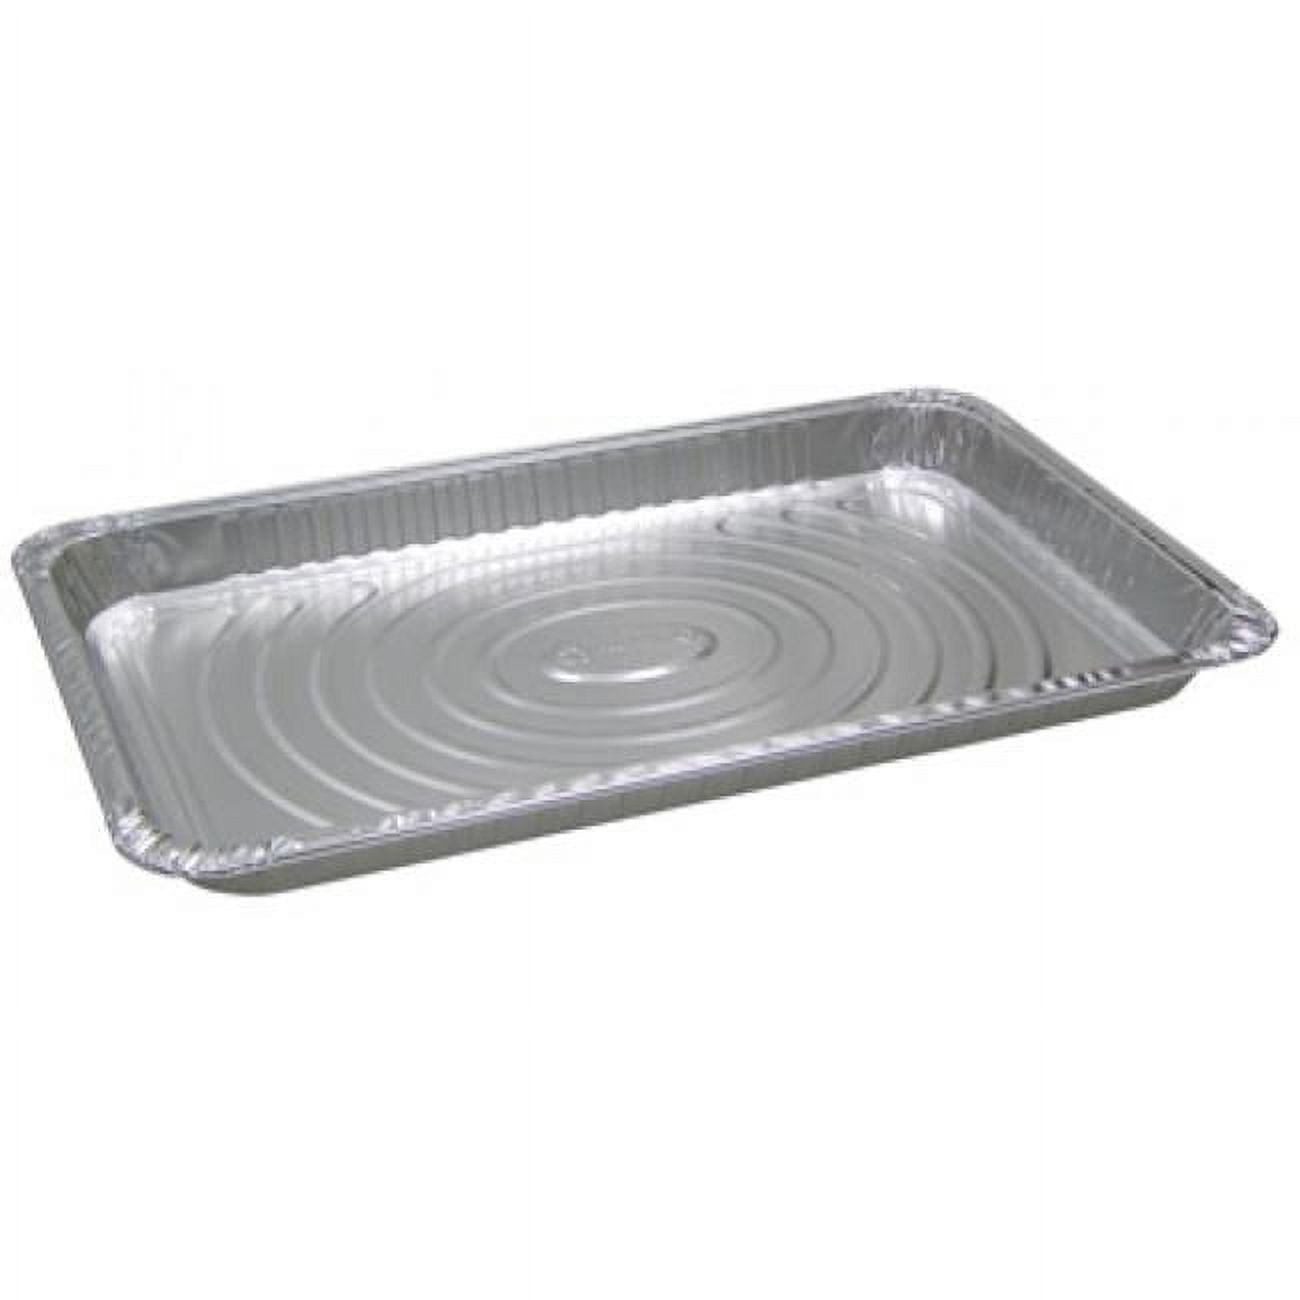 Y6110xh Cpc Full Shallow Steam Table Pan - Case Of 40